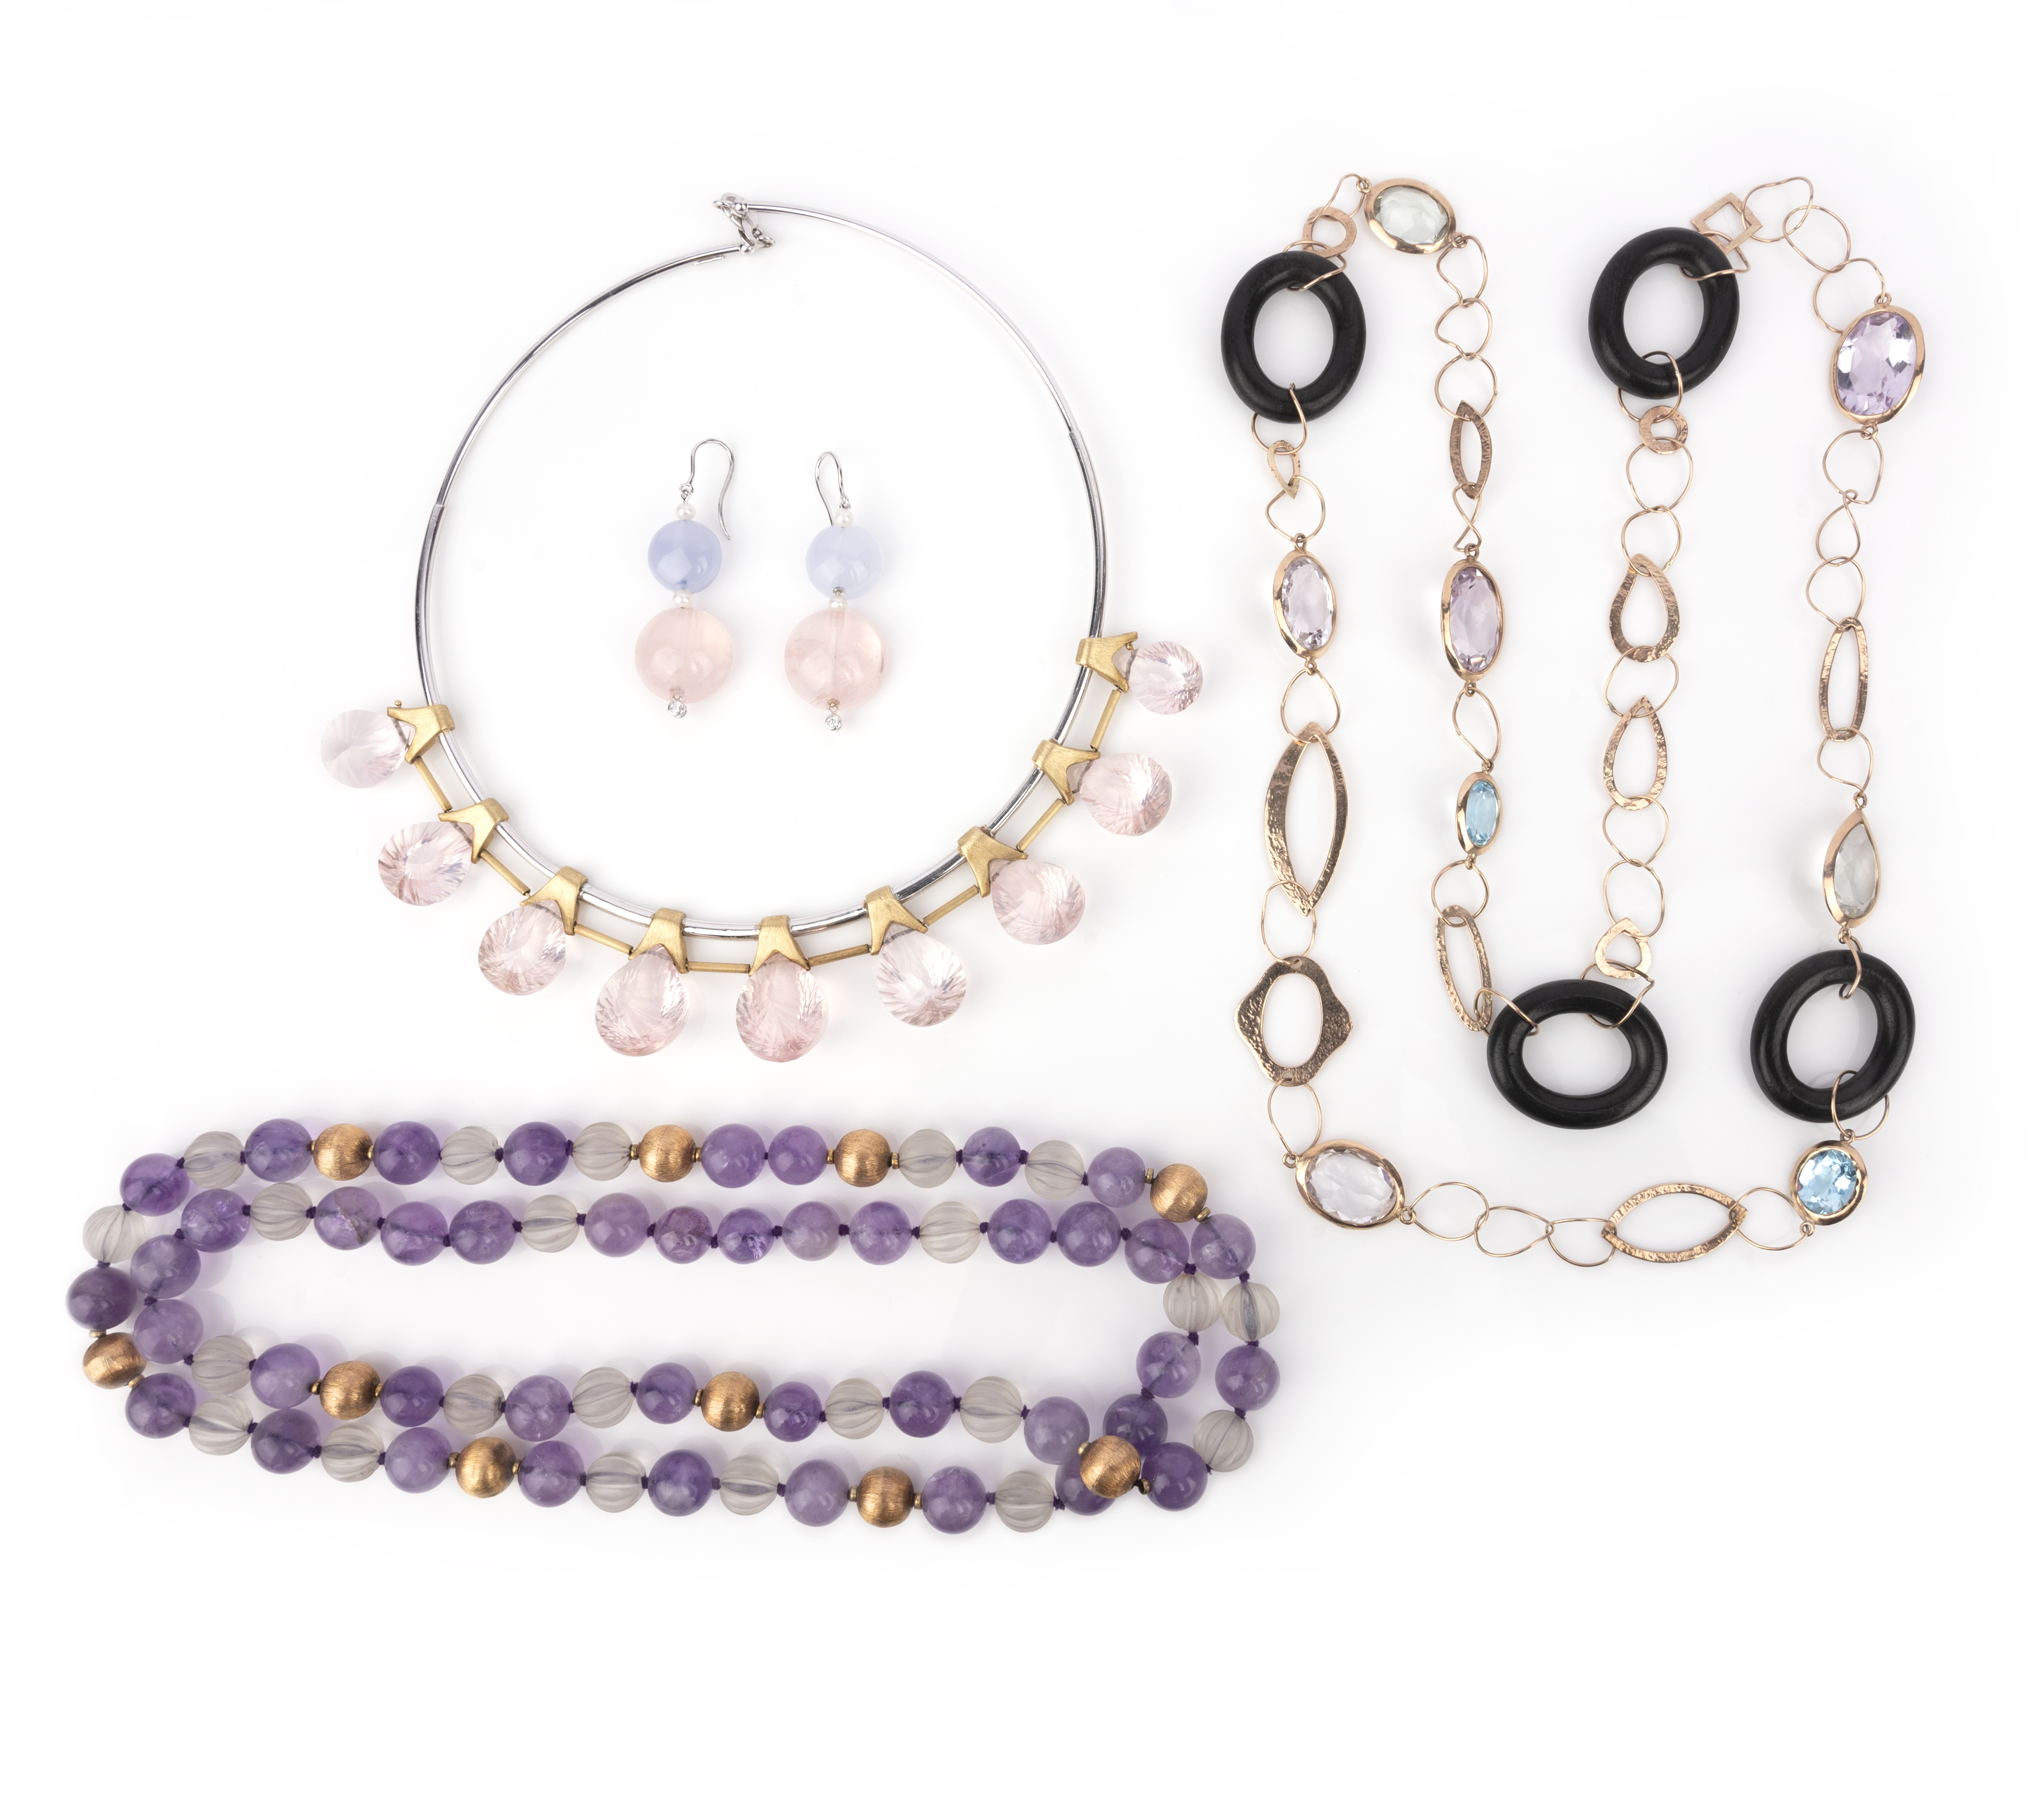 A collection of jewellery, comprising: a collar suspending a fringe of pear-shaped rose quartz